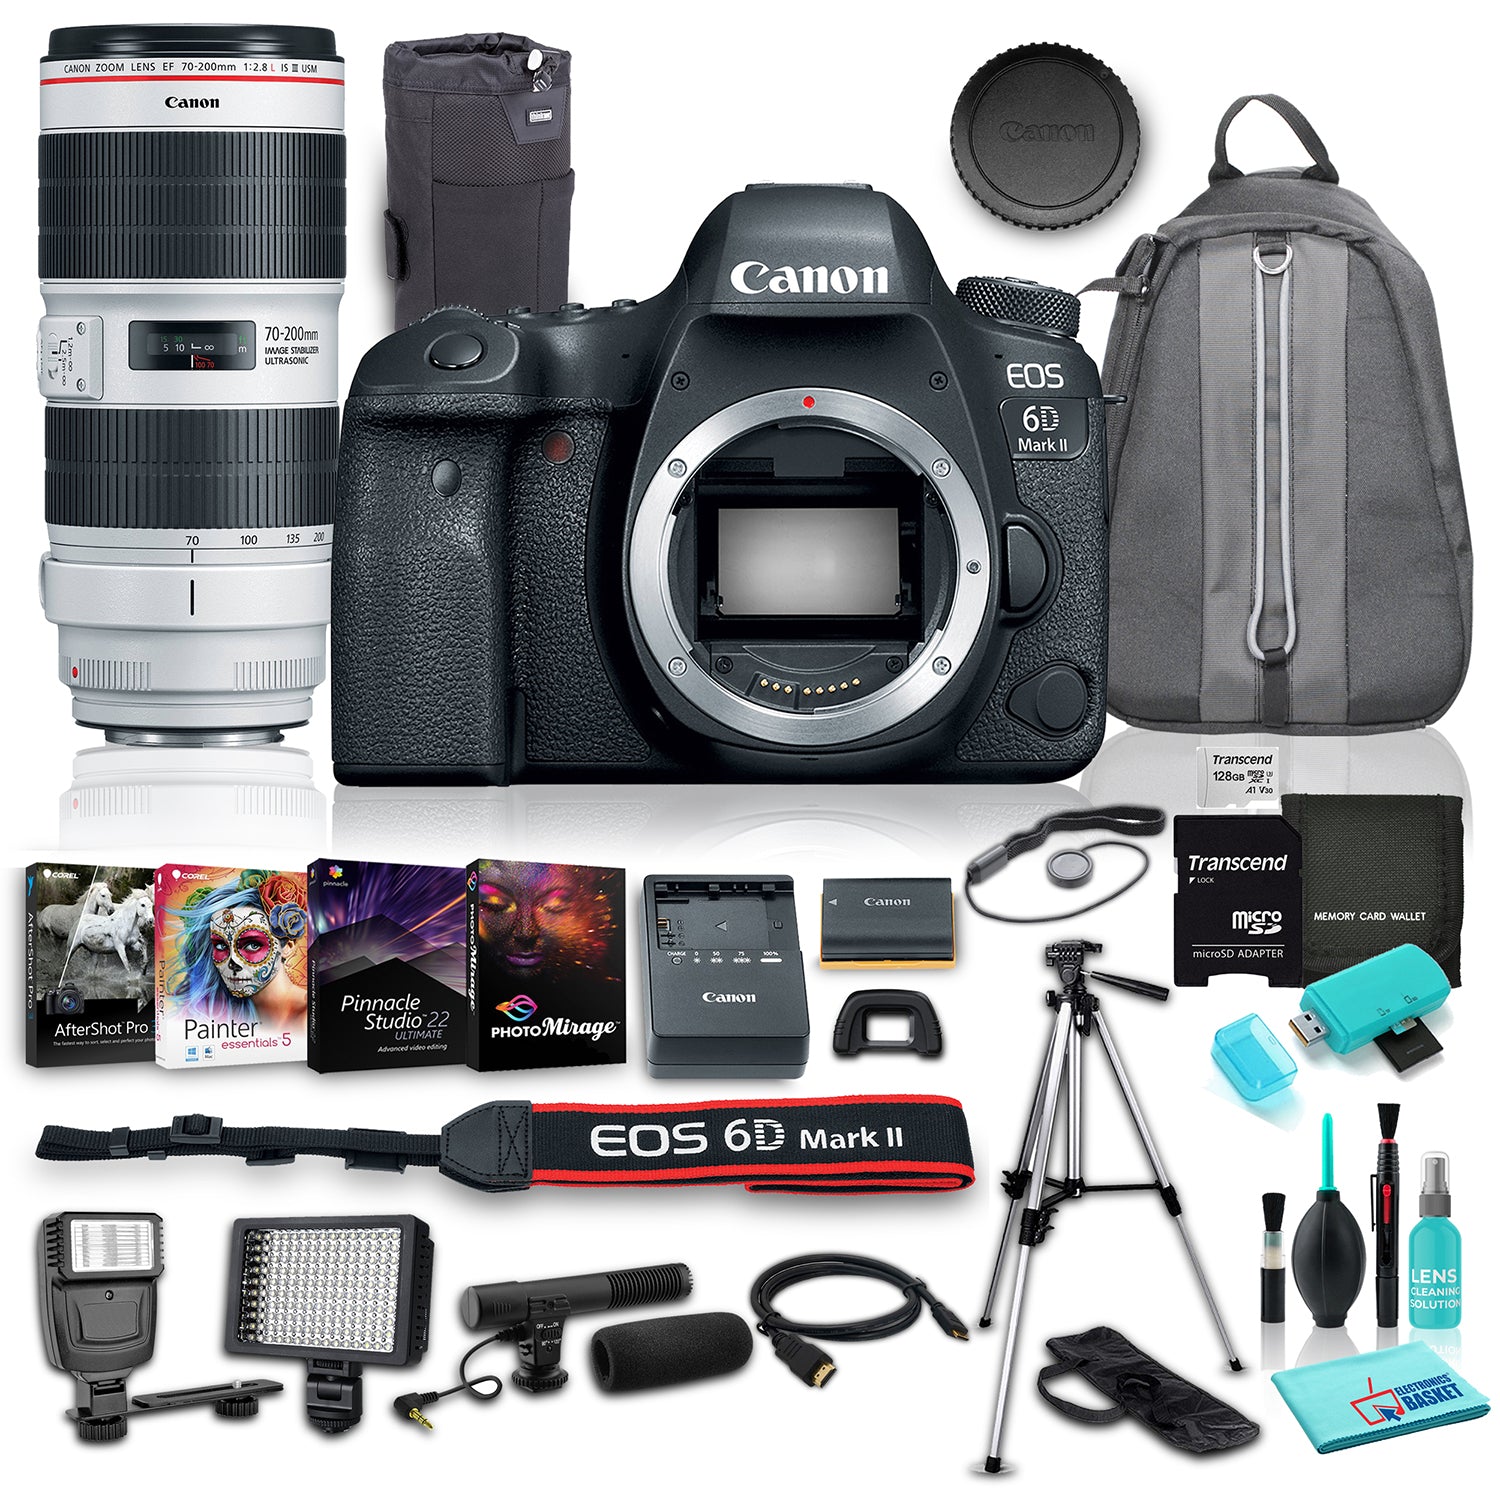 Canon EOS 6D Mark II DSLR Camera (Body Only) w/ Canon EF 70-200mm f/2.8L IS III USM Lens Bundle w/ 14 Piece Accessories